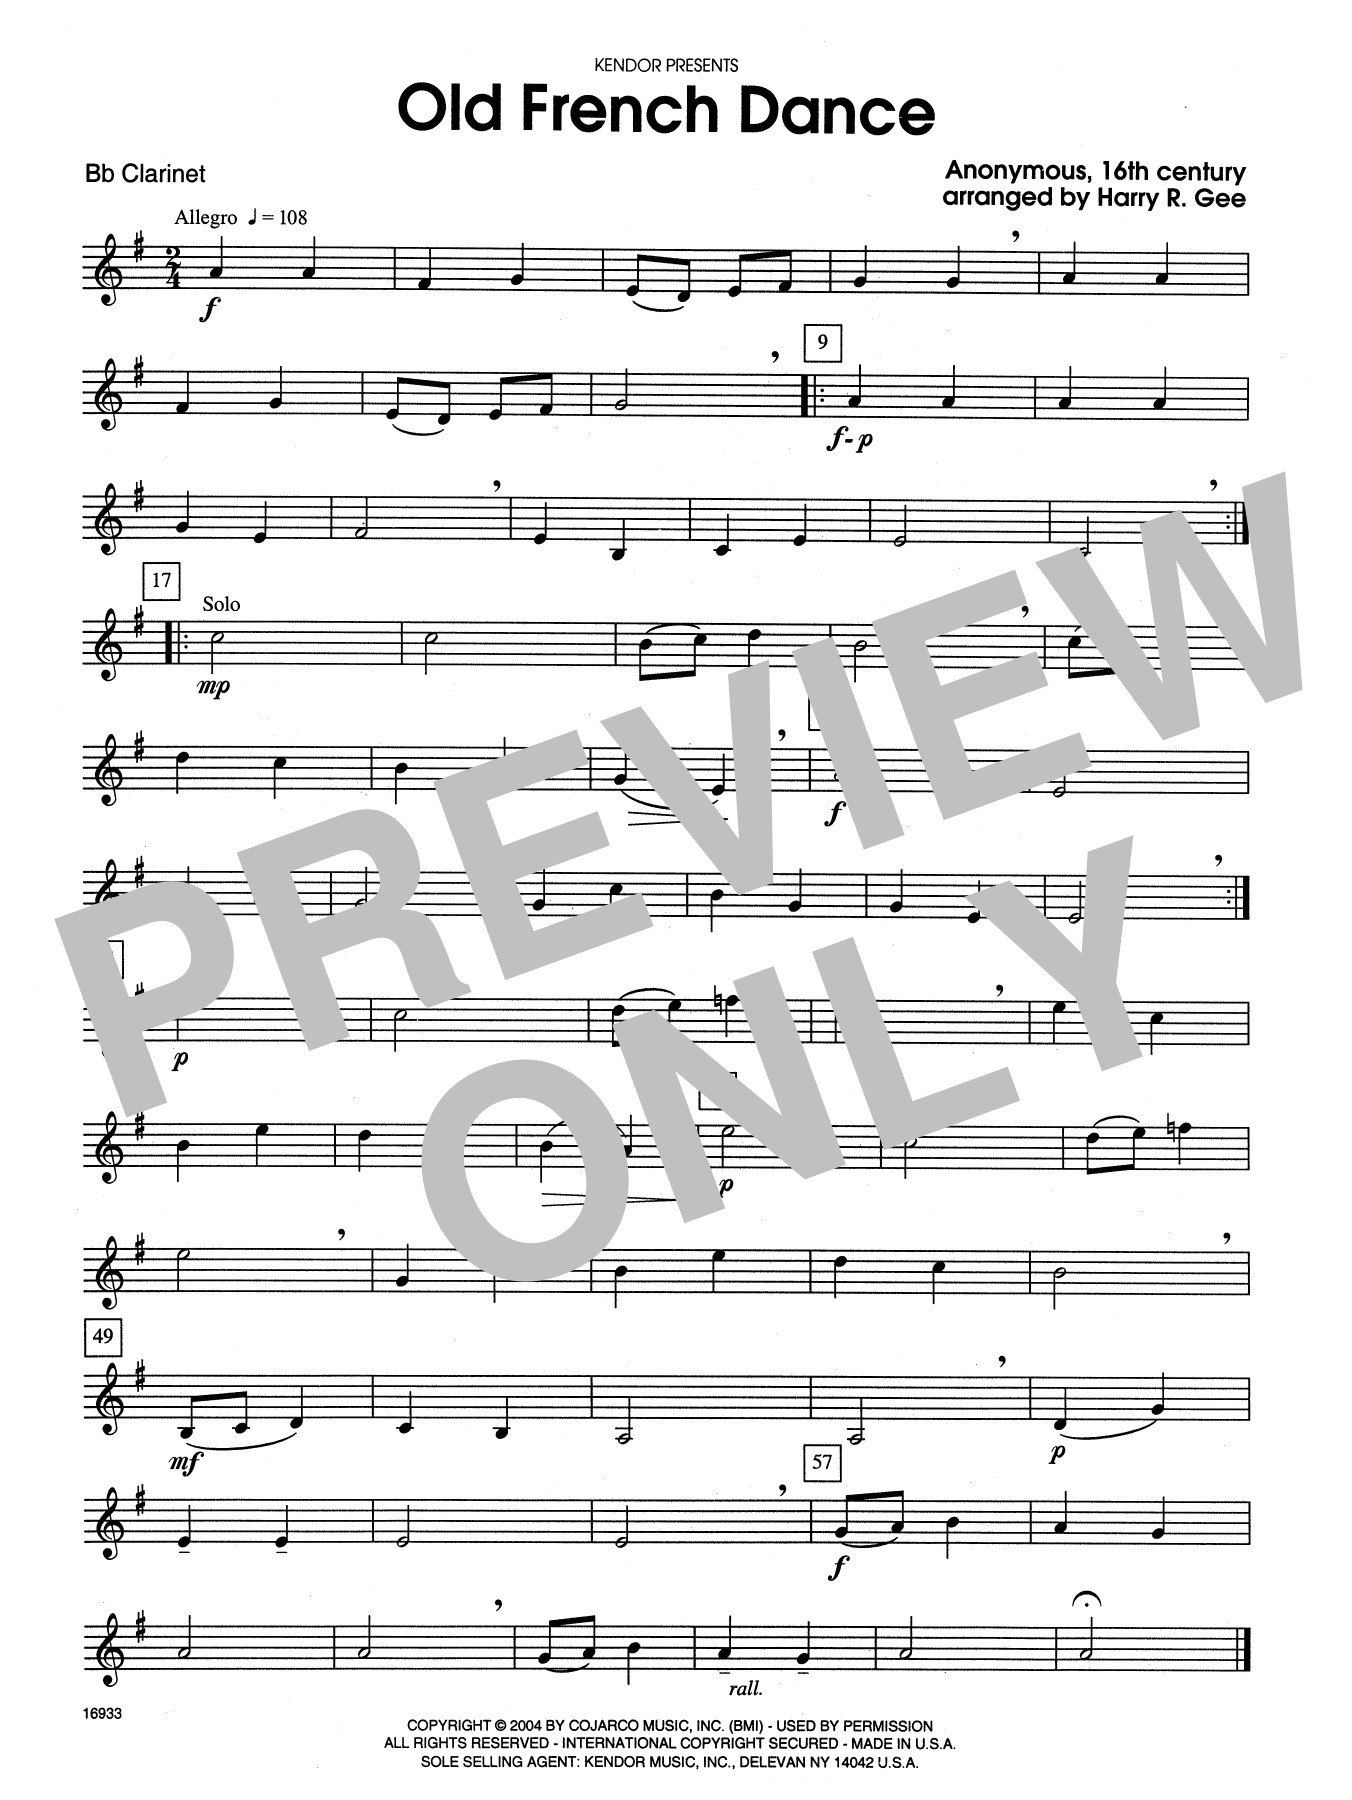 Download Harry R. Gee Old French Dance - Bb Clarinet Sheet Music